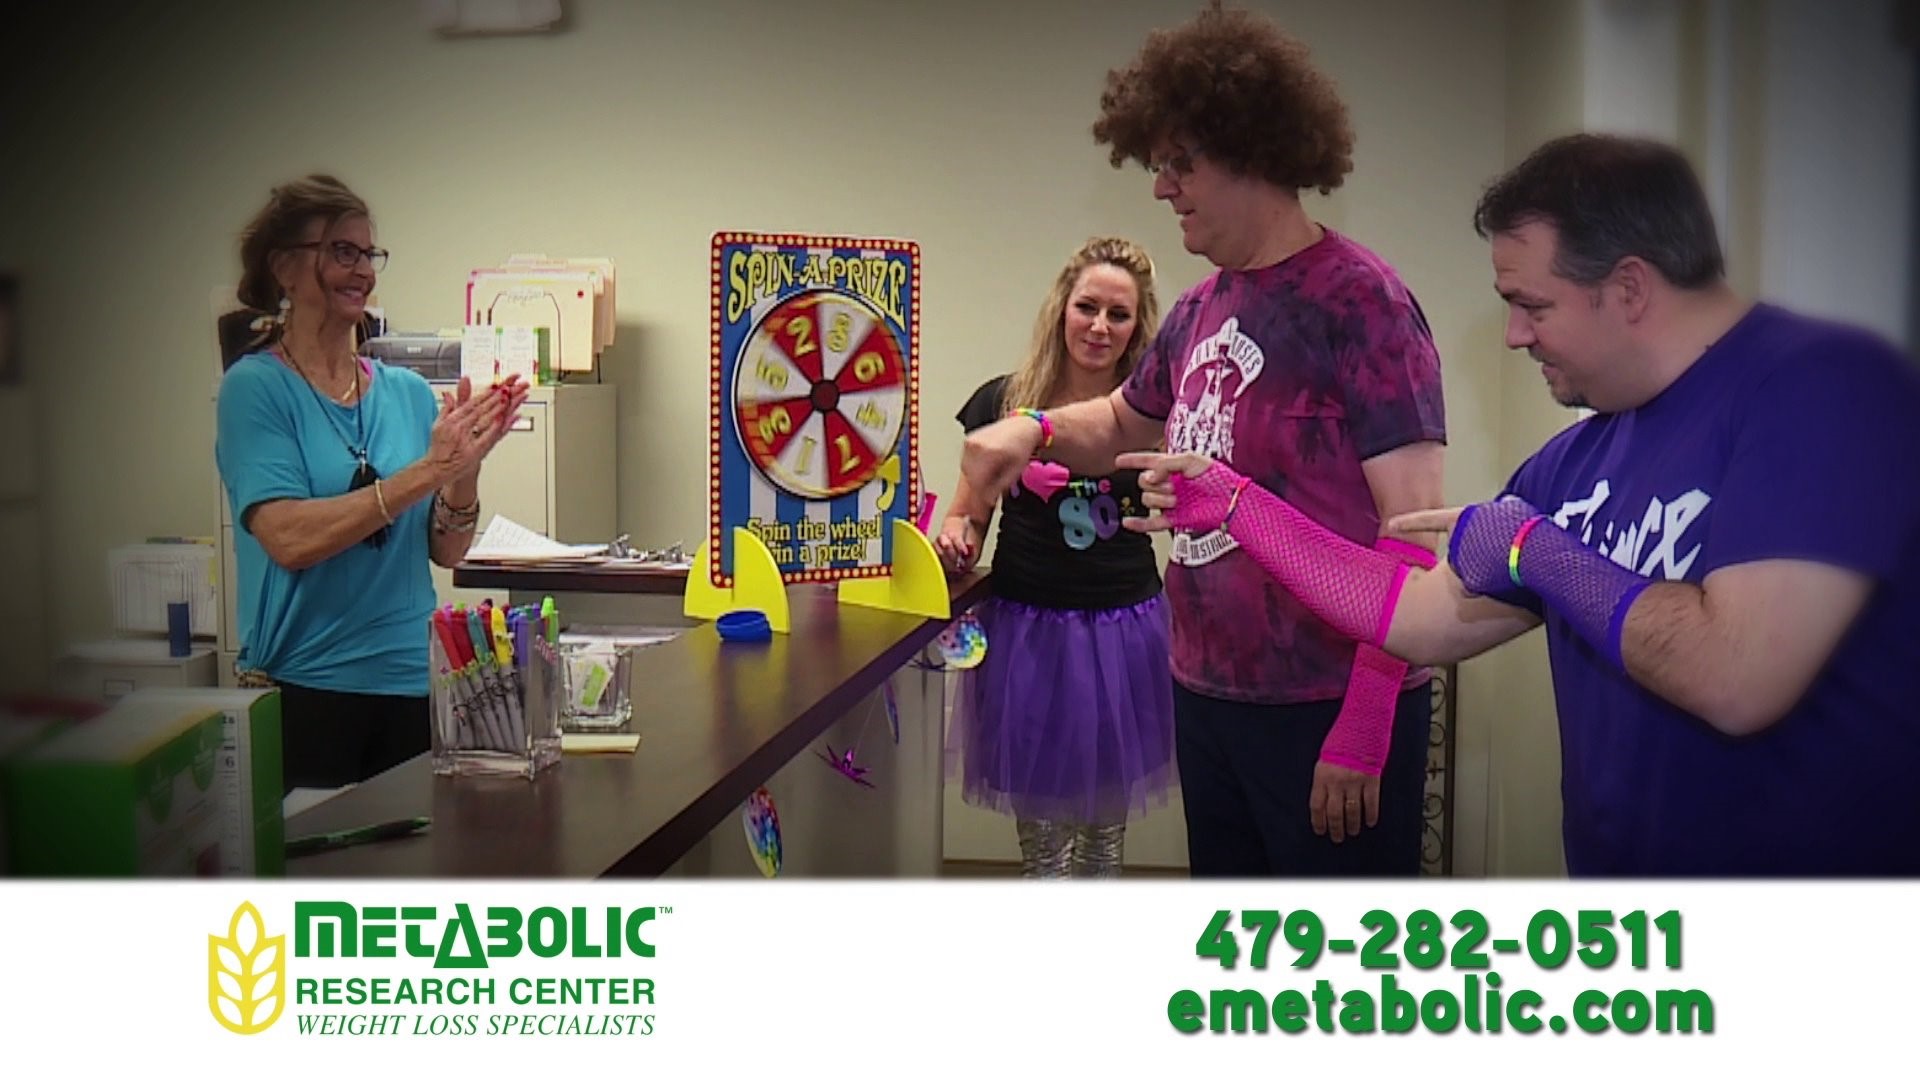 Metabolic Research Center - 80s Week Open House -  Phase 7